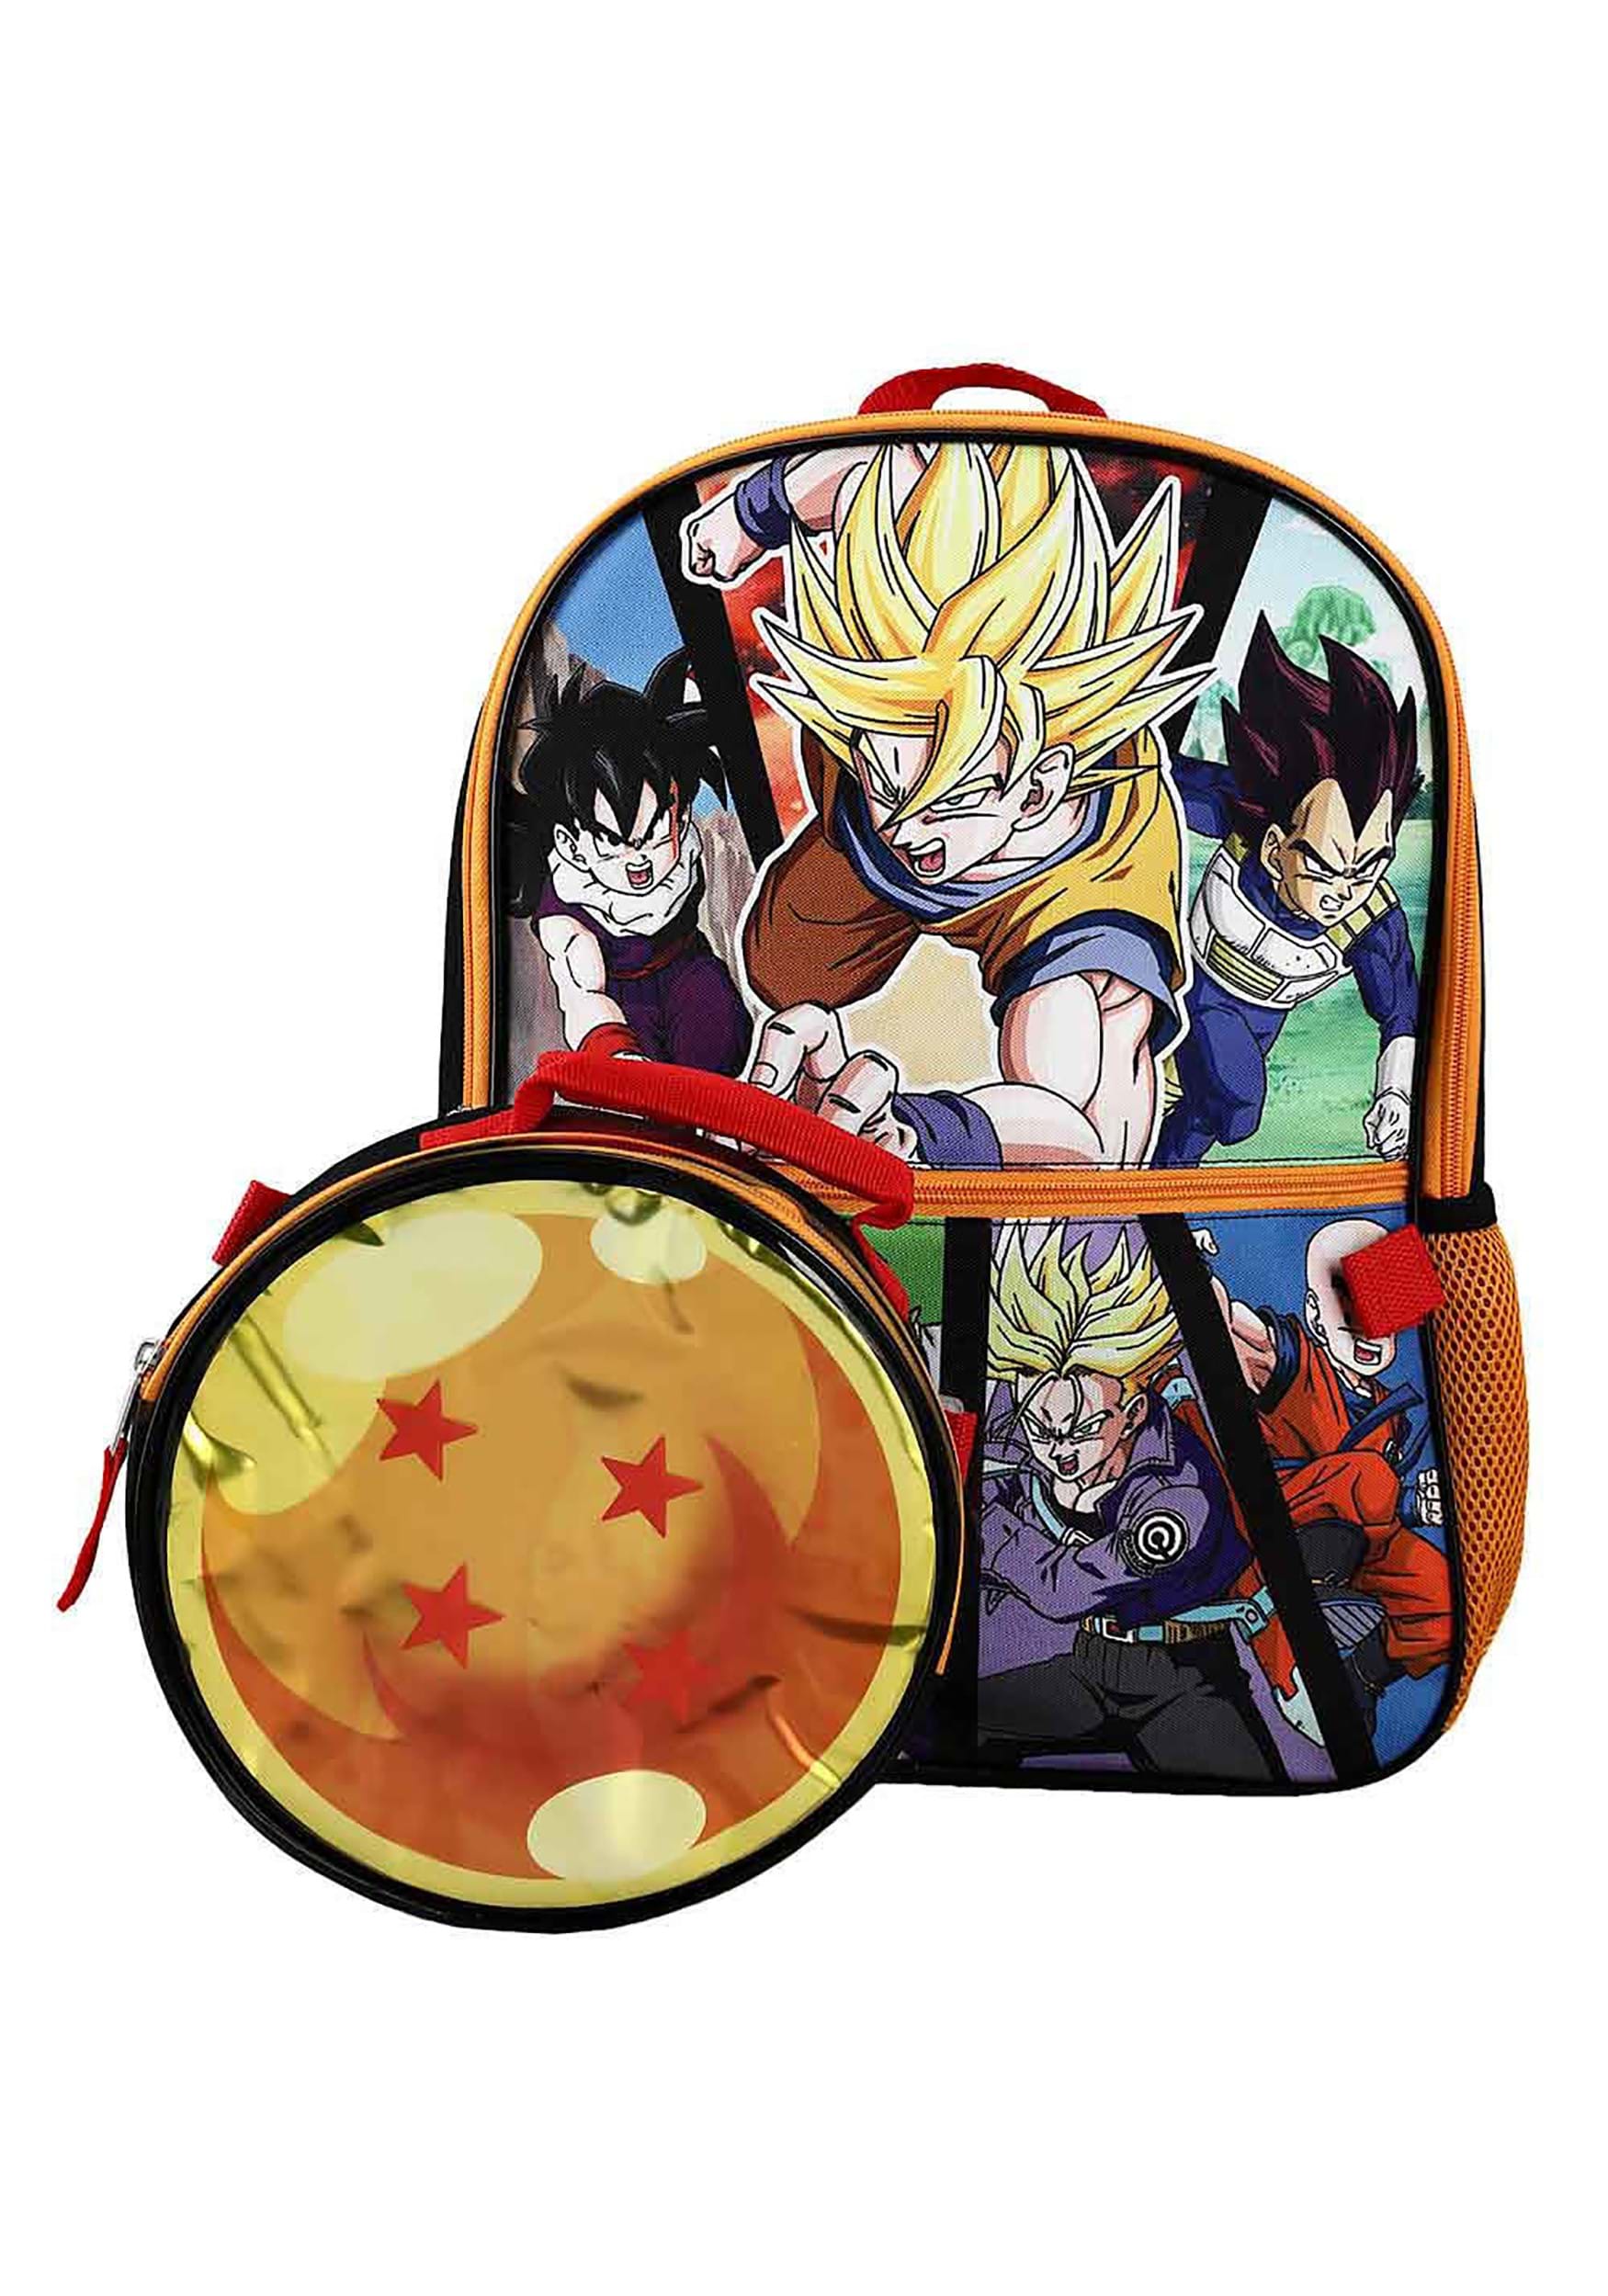 Action Comics Dragon Ball Z Backpack with Lunch Box - Bundle with 16”  Dragon Ball Backpack, Dragon Ball Lunch Bag, Stickers, More | Dragon Ball